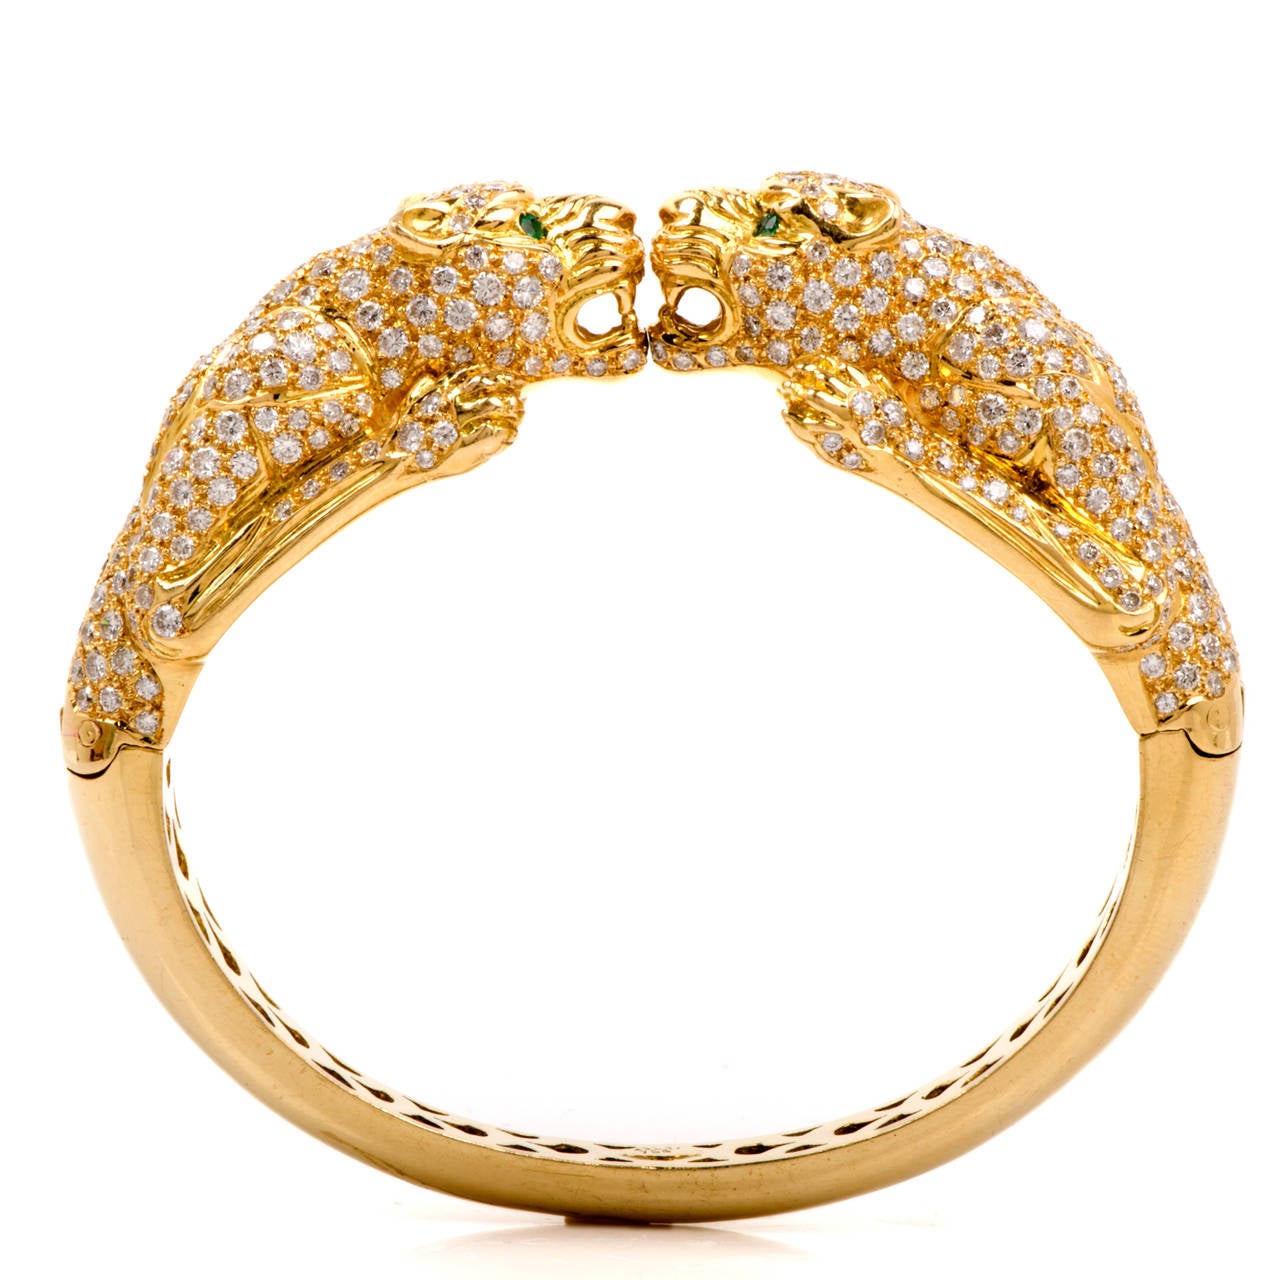 This majestic estate cuff bracelet is crafted in solid 18K yellow gold. This bracelet is accented with some 474 genuine pave set diamonds approx 19.00cttw, G-H color, VS clarity, and detailed at the eyes are 4 genuine natural glistening Colombian